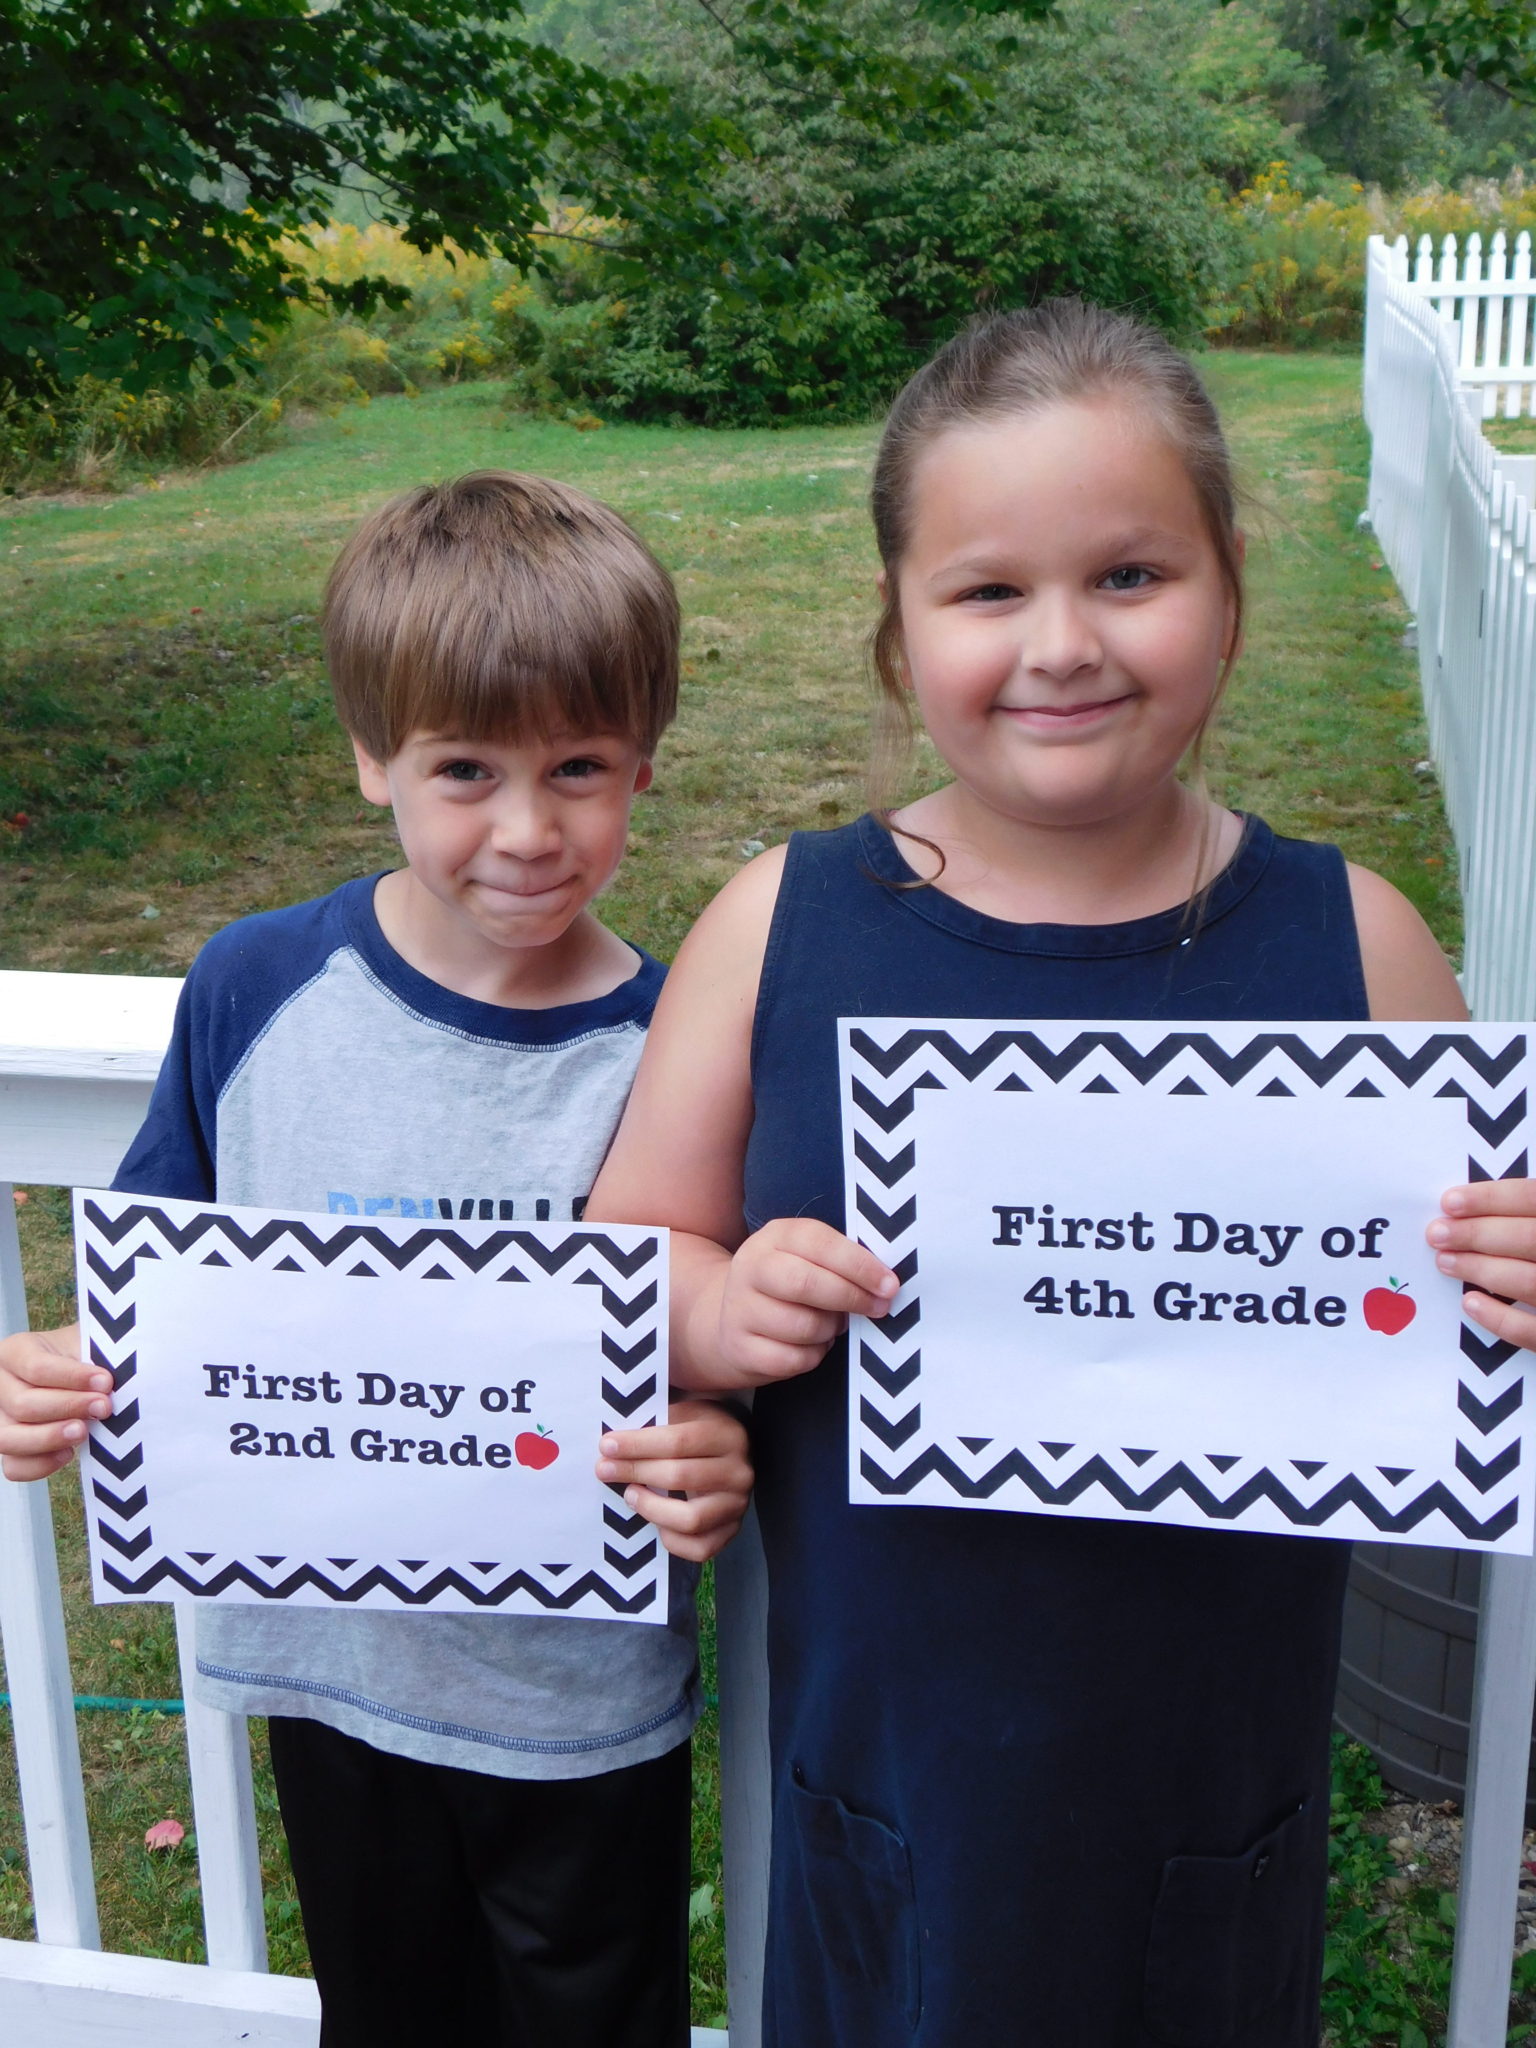 back-to-homeschool traditions- photos of first day